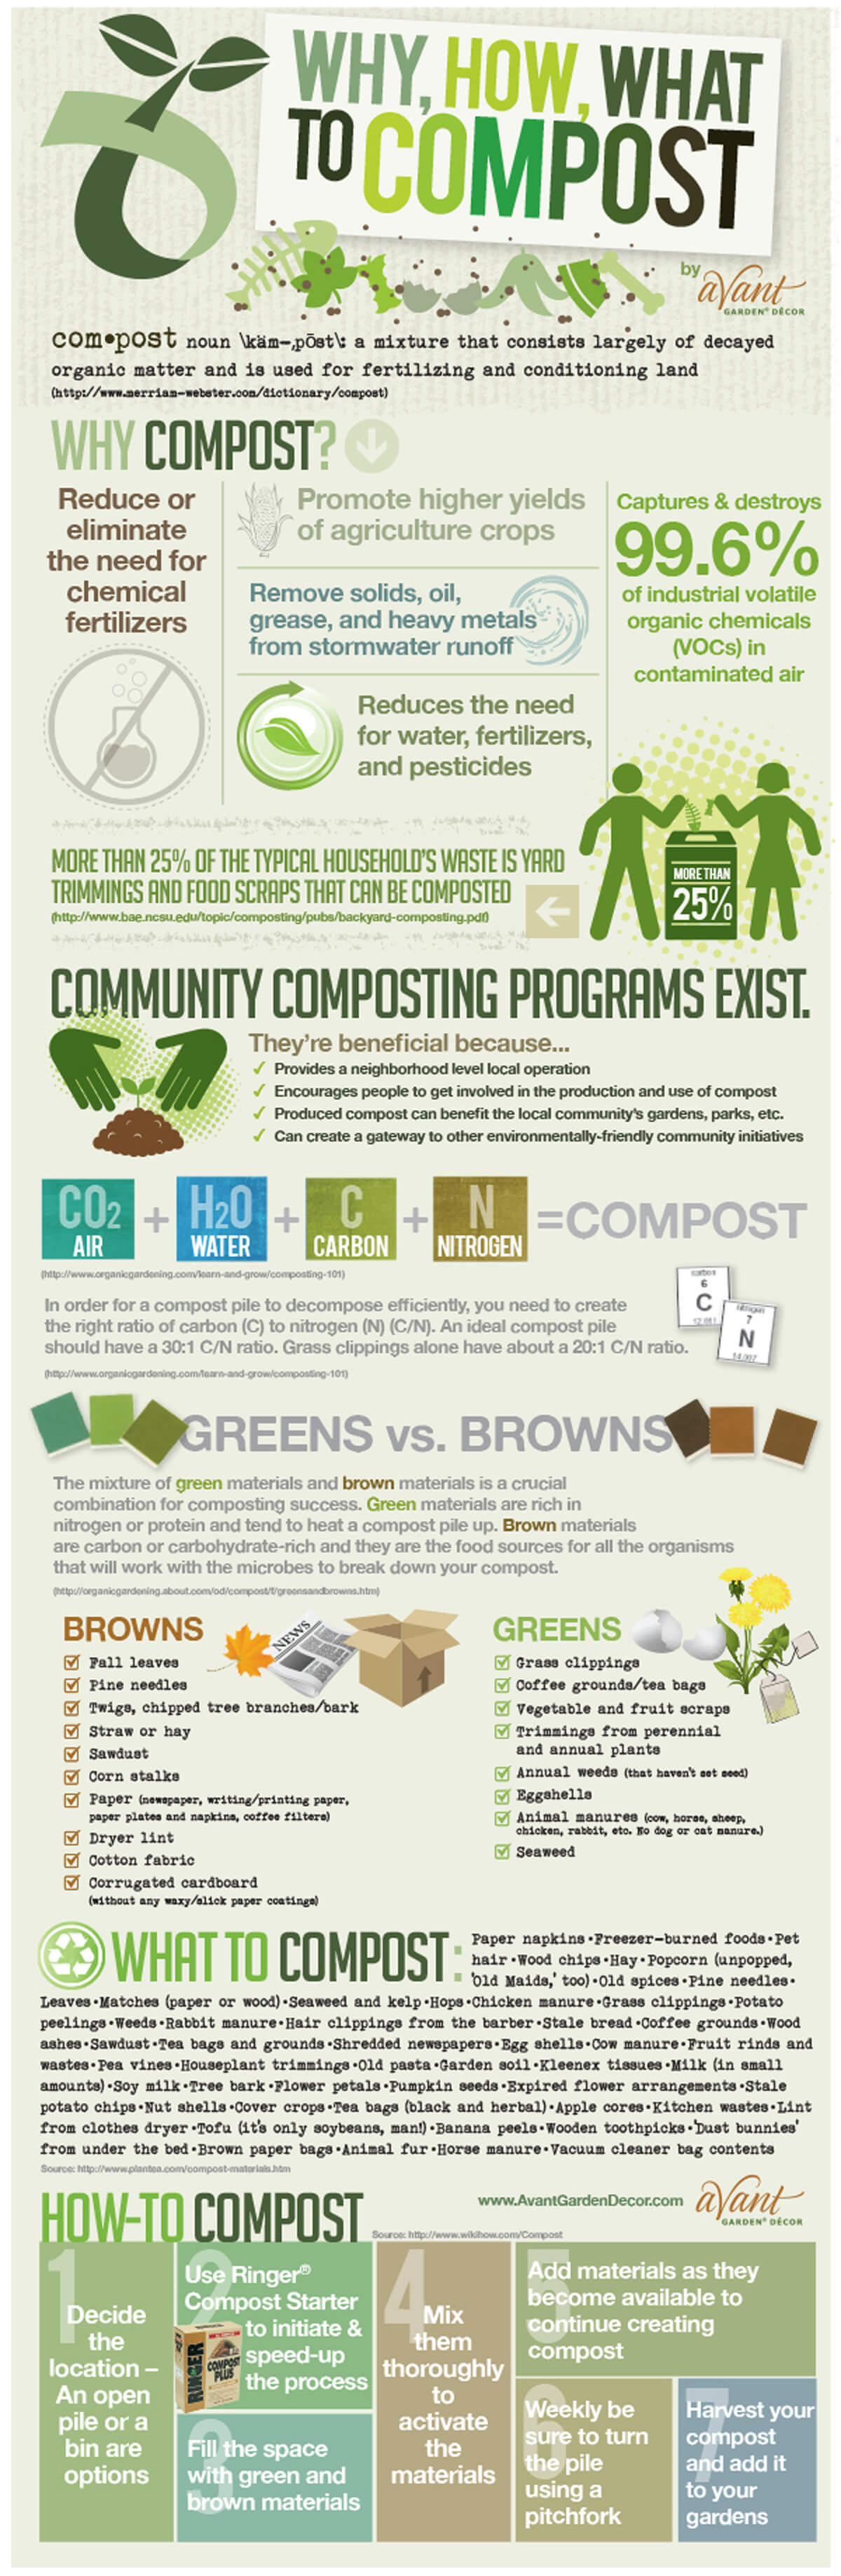 How, why, and what to compost infographic